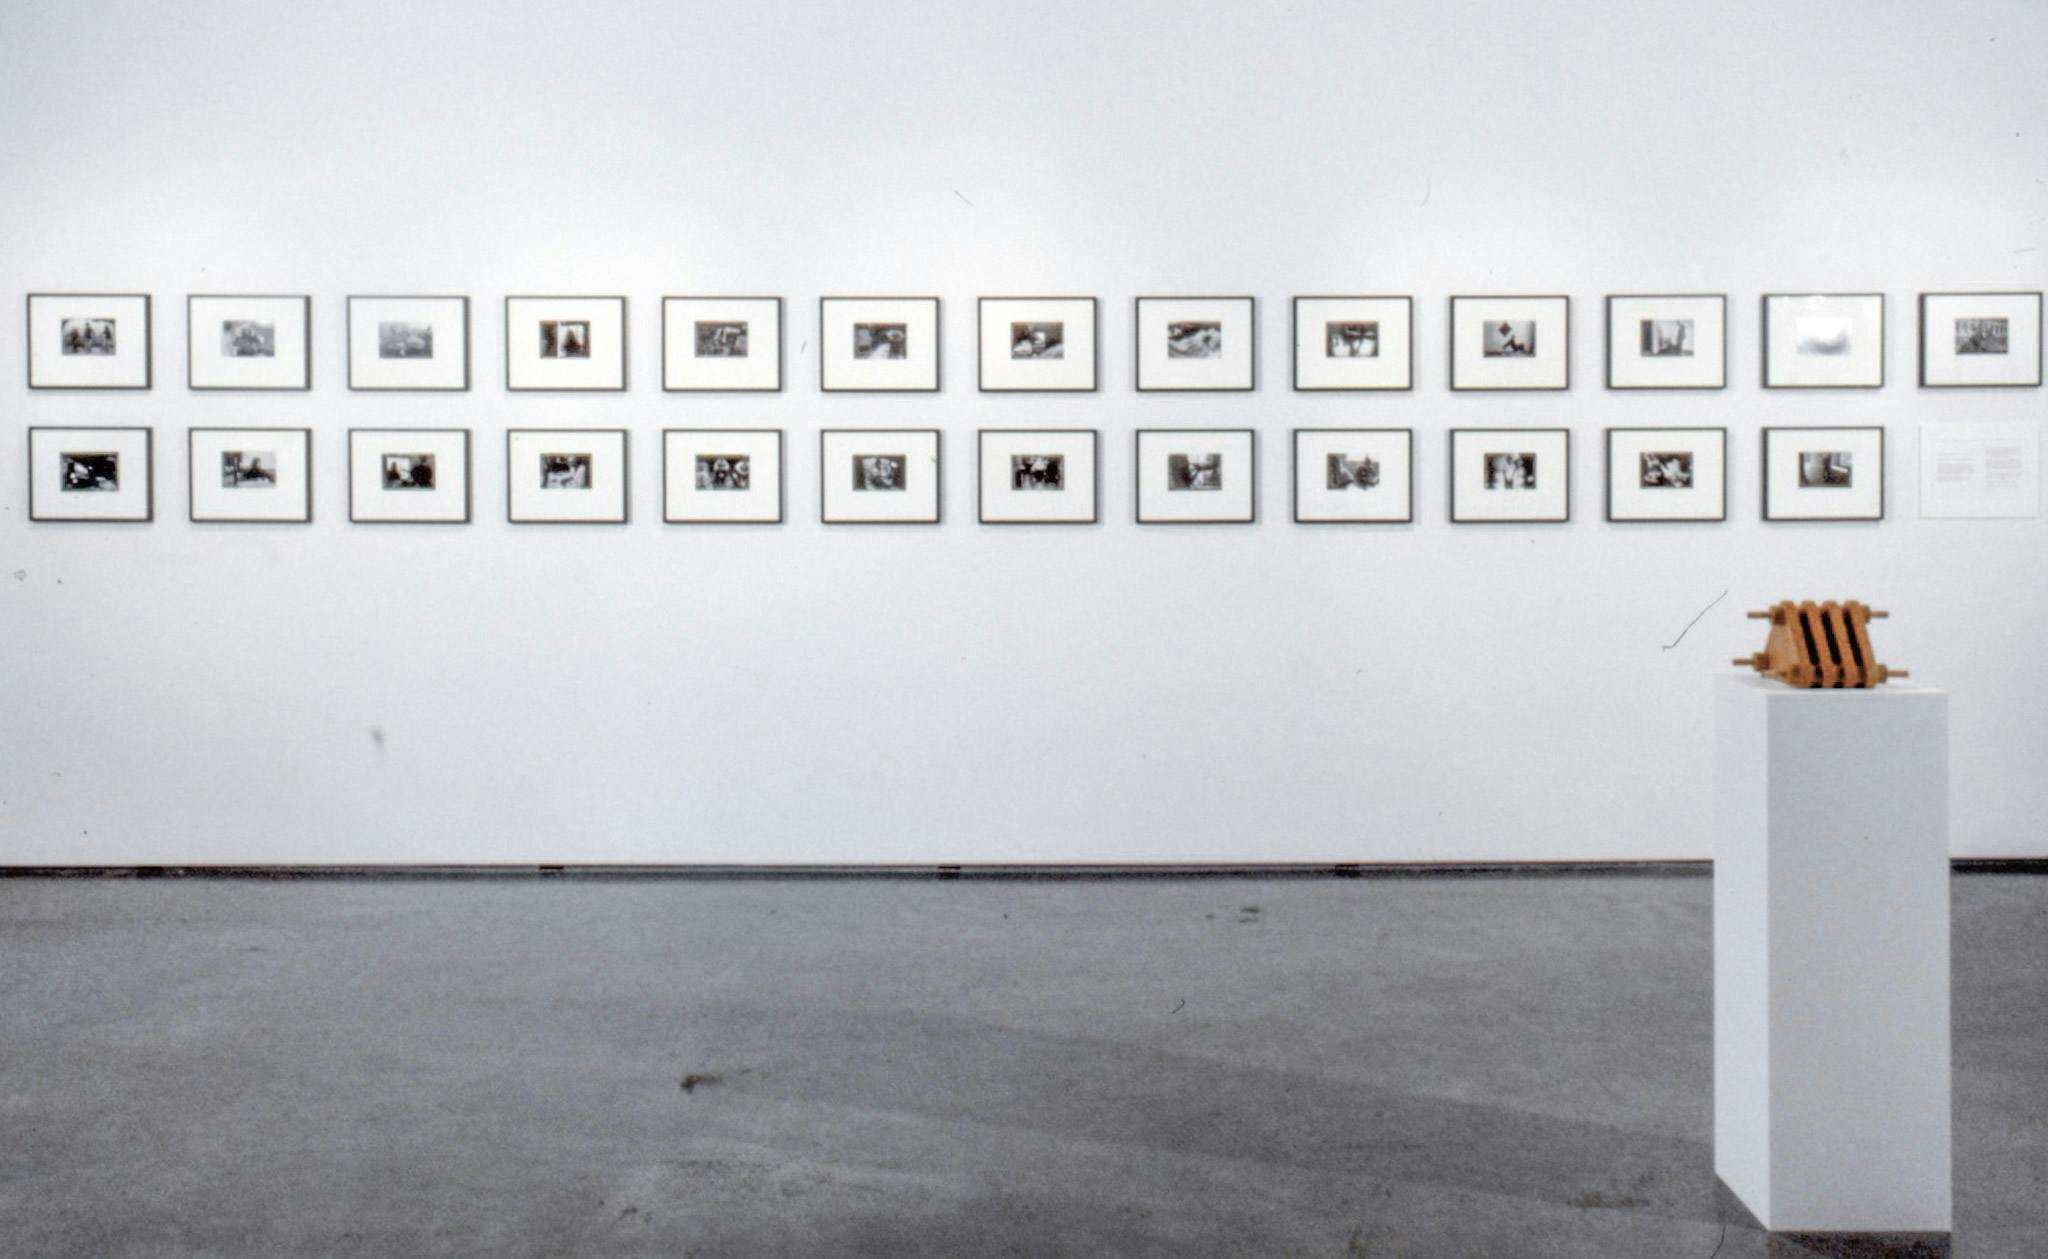 A number of black and whire photographs are mounted on the wall. They are arranged in two rows running horizontally to the floor. A wood sculpture on a pedestal stands in front of this wall.